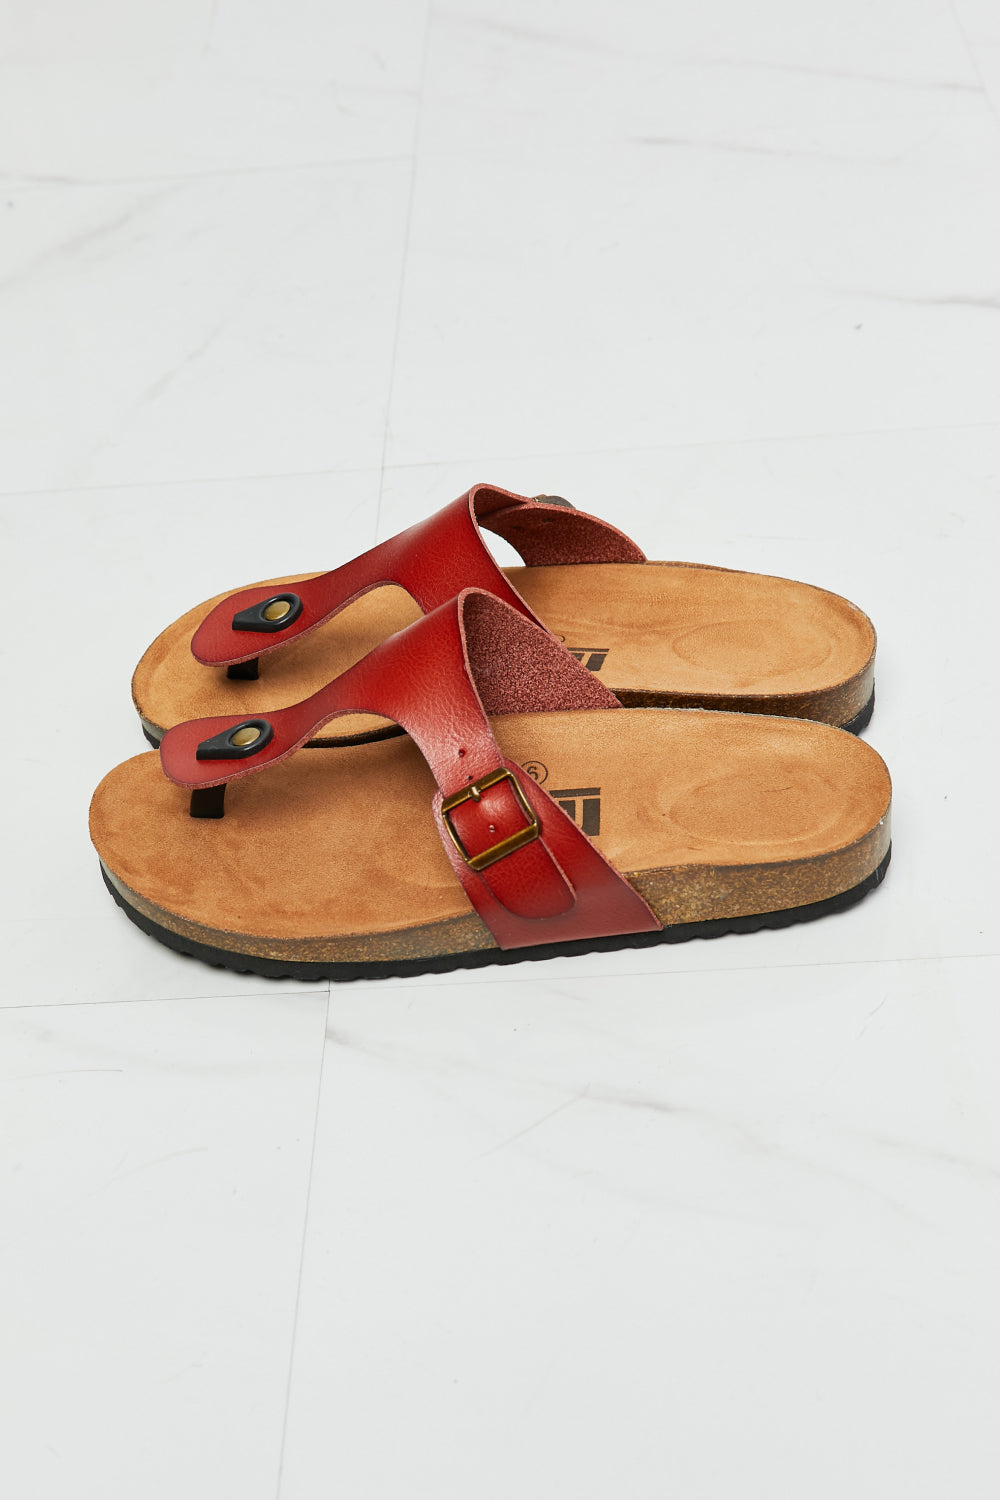 MMShoes Drift Away T-Strap Flip-Flop in Red - Sun of the Beach Boutique